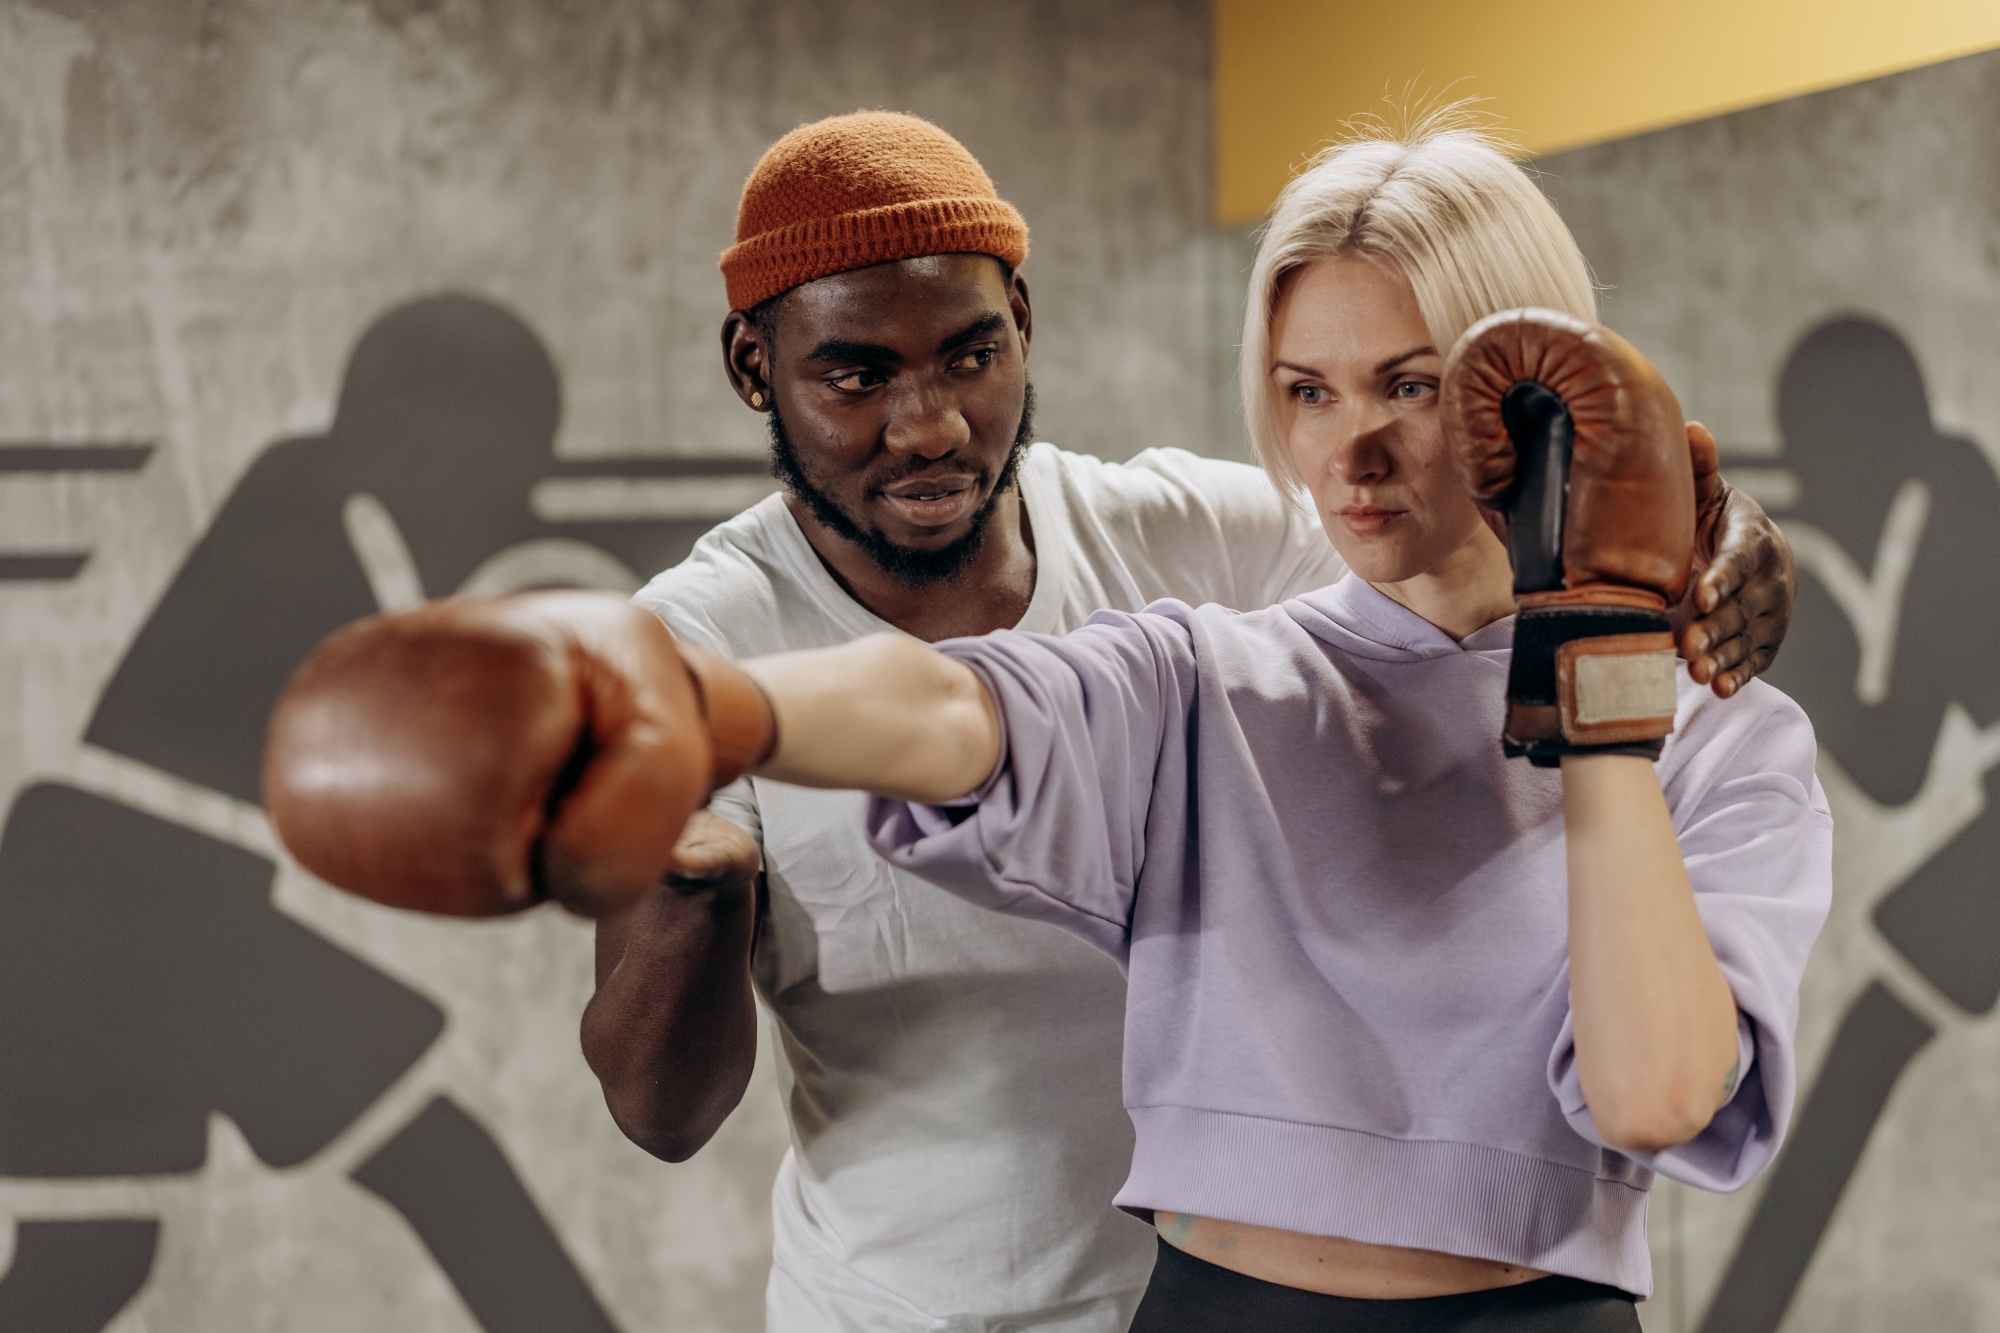 Trainer teaching woman to box - boxing workout.